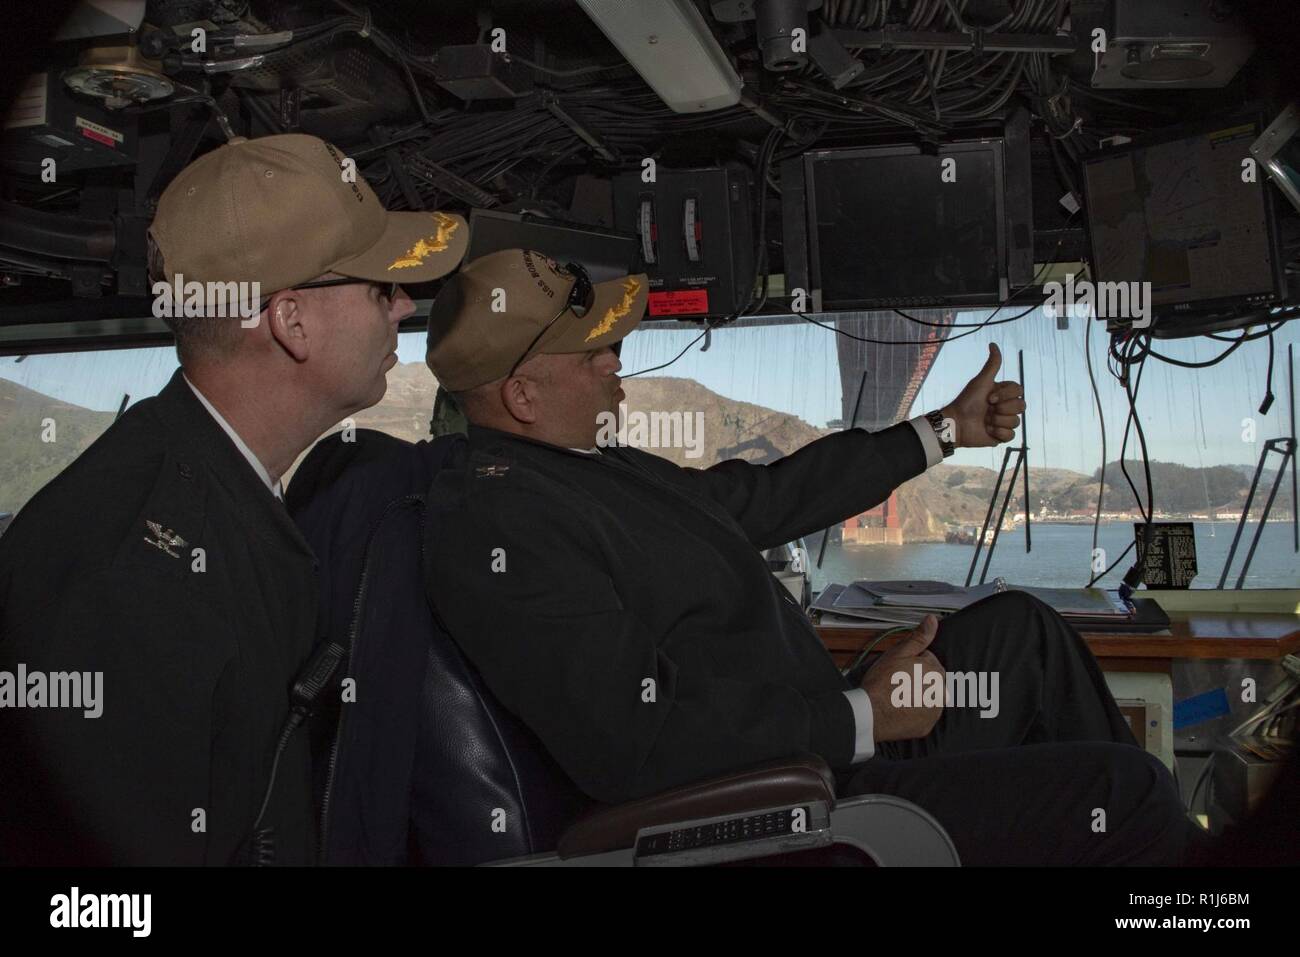 SAN FRANCISCO (Oct. 5, 2018) Capt. Rich LeBron, right, commanding officer of the amphibious assault ship USS Bonhomme Richard (LHD 6), and Gregory Thoroman, the ship’s executive officer, navigate the ship under the Golden Gate Bridge while participating in the Parade of Ships as part of San Francisco Fleet Week 2018. San Francisco Fleet Week is an opportunity for the American public to meet their Navy, Marine Corps and Coast Guard teams and experience America’s sea services. During fleet week, service members participate in various community service events, showcase capabilities and equipment  Stock Photo